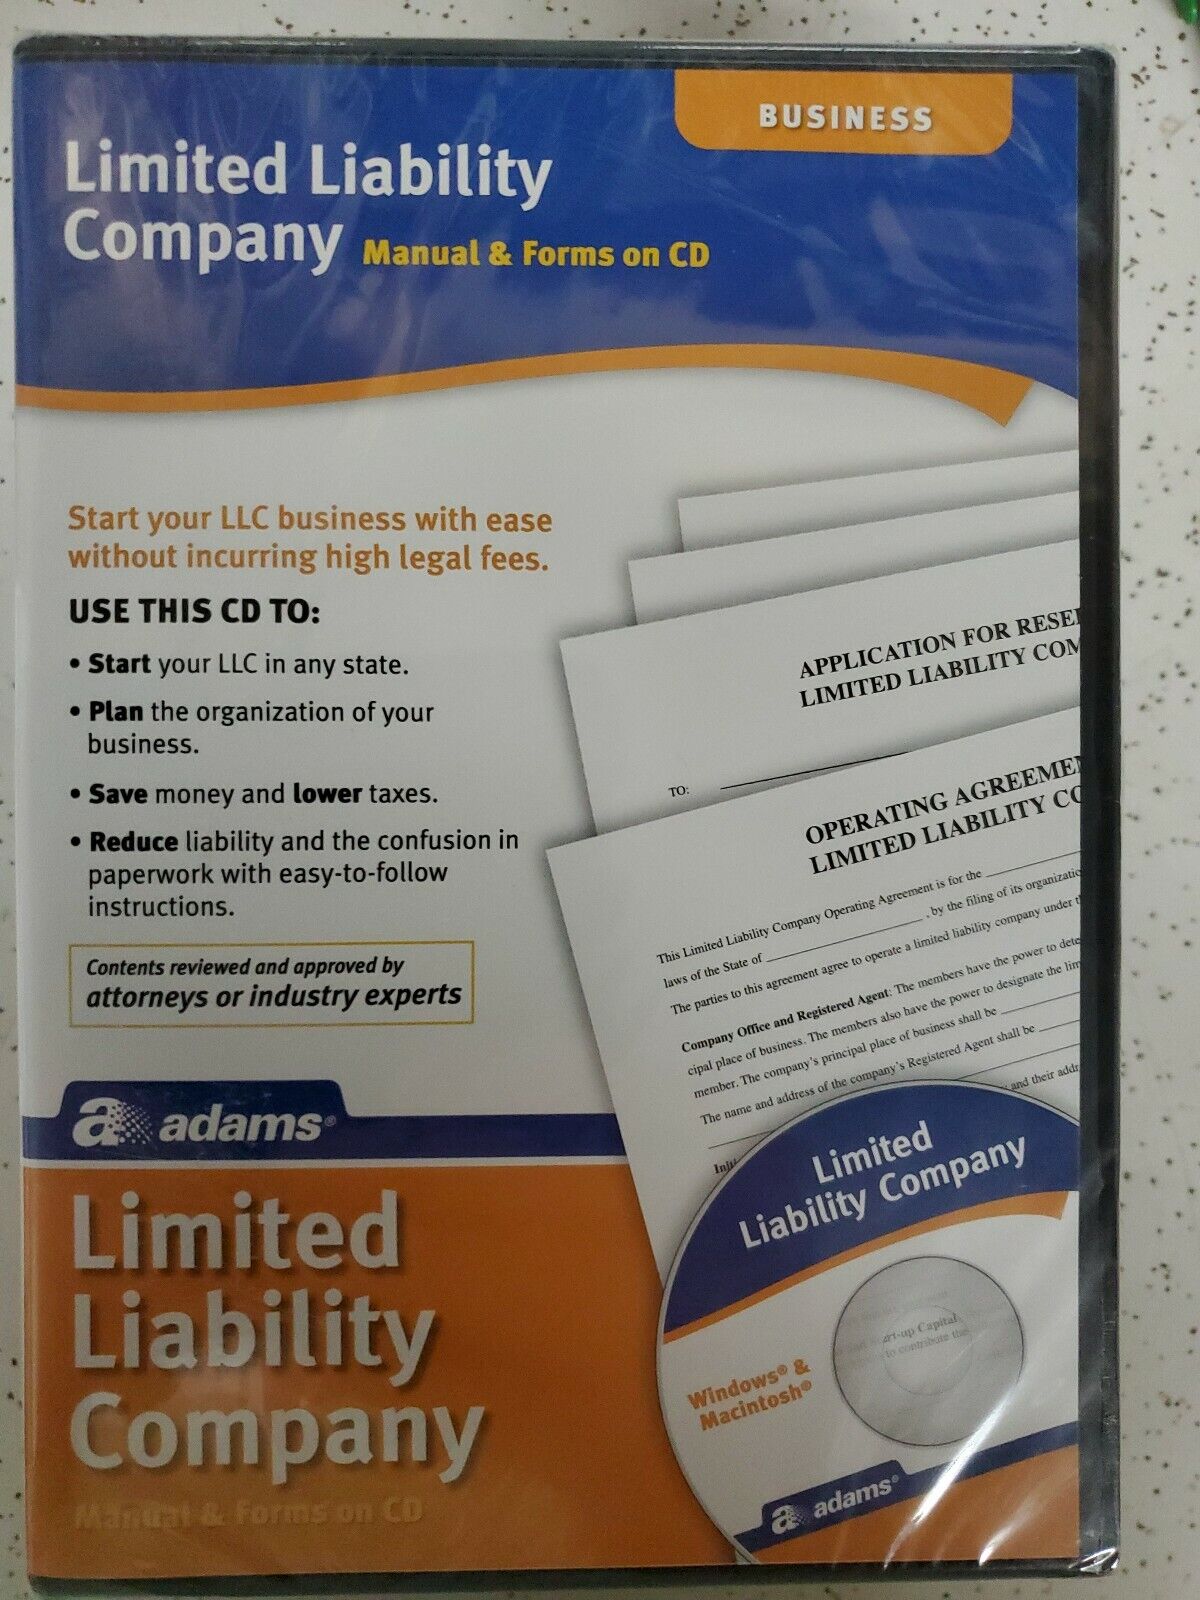 Adams Limited Liability Company Manual & Forms on CD, **BRAND NEW SEALED**